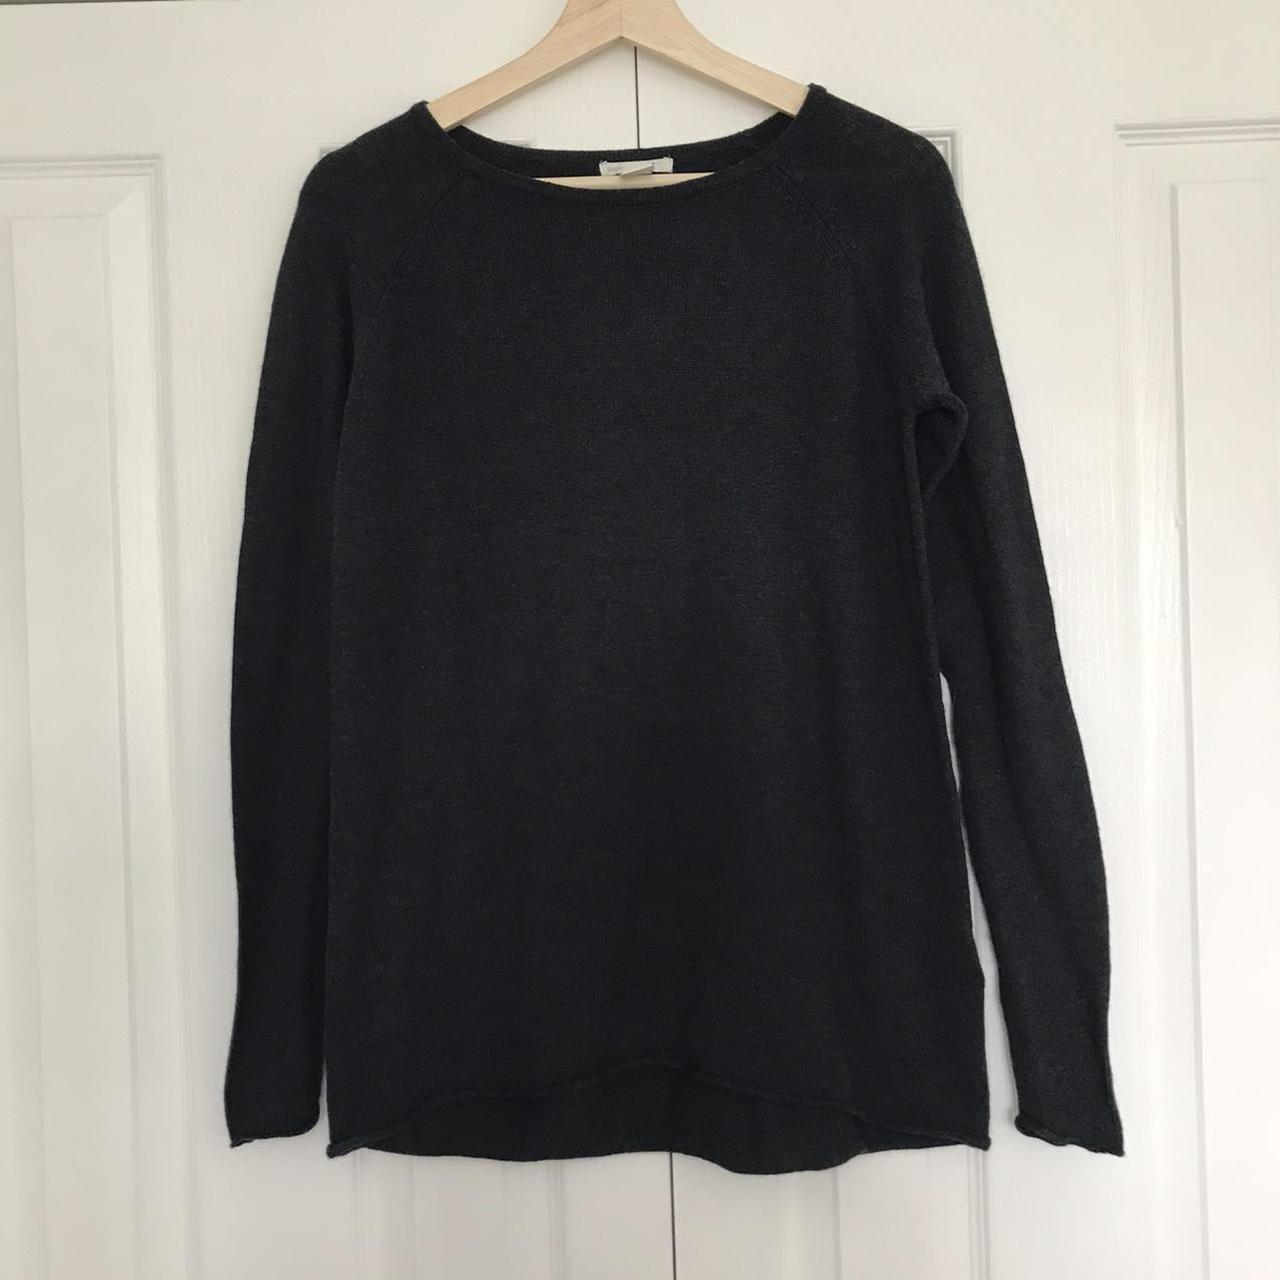 Charcoal knitted jumper •woman’s size S •from a... - Depop